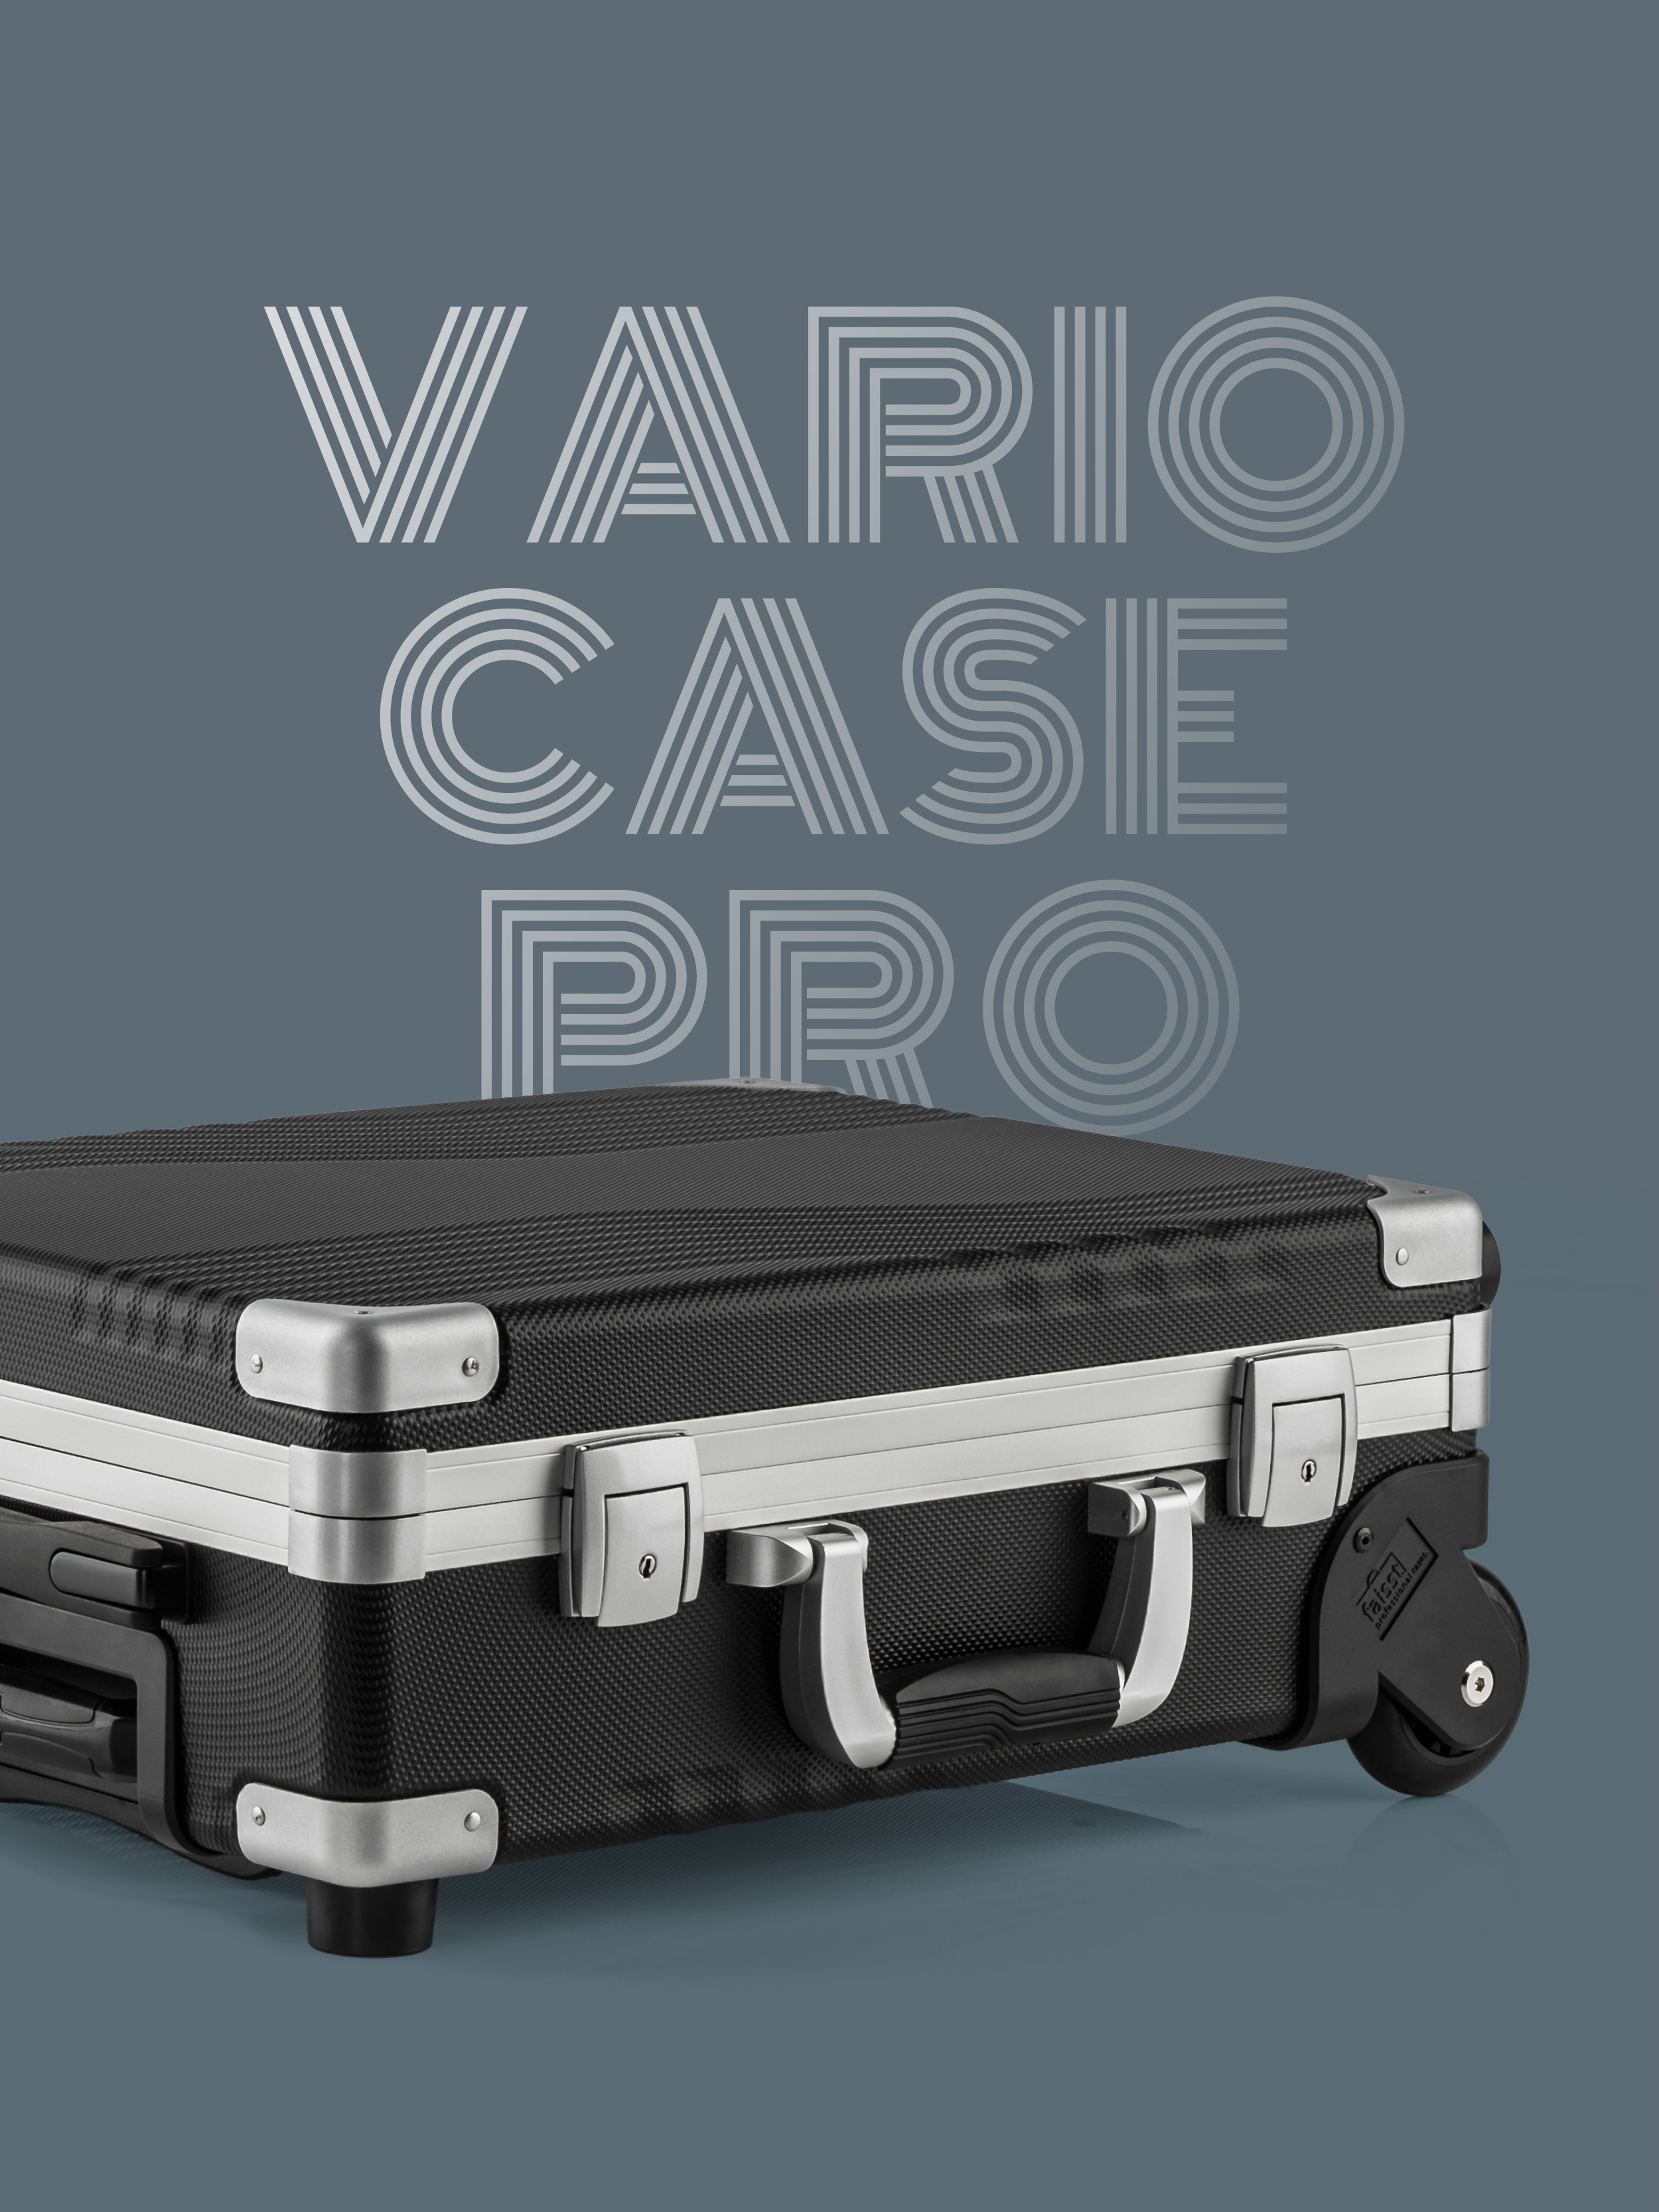 Vario Case Pro - Tailor-Made Product Presentation